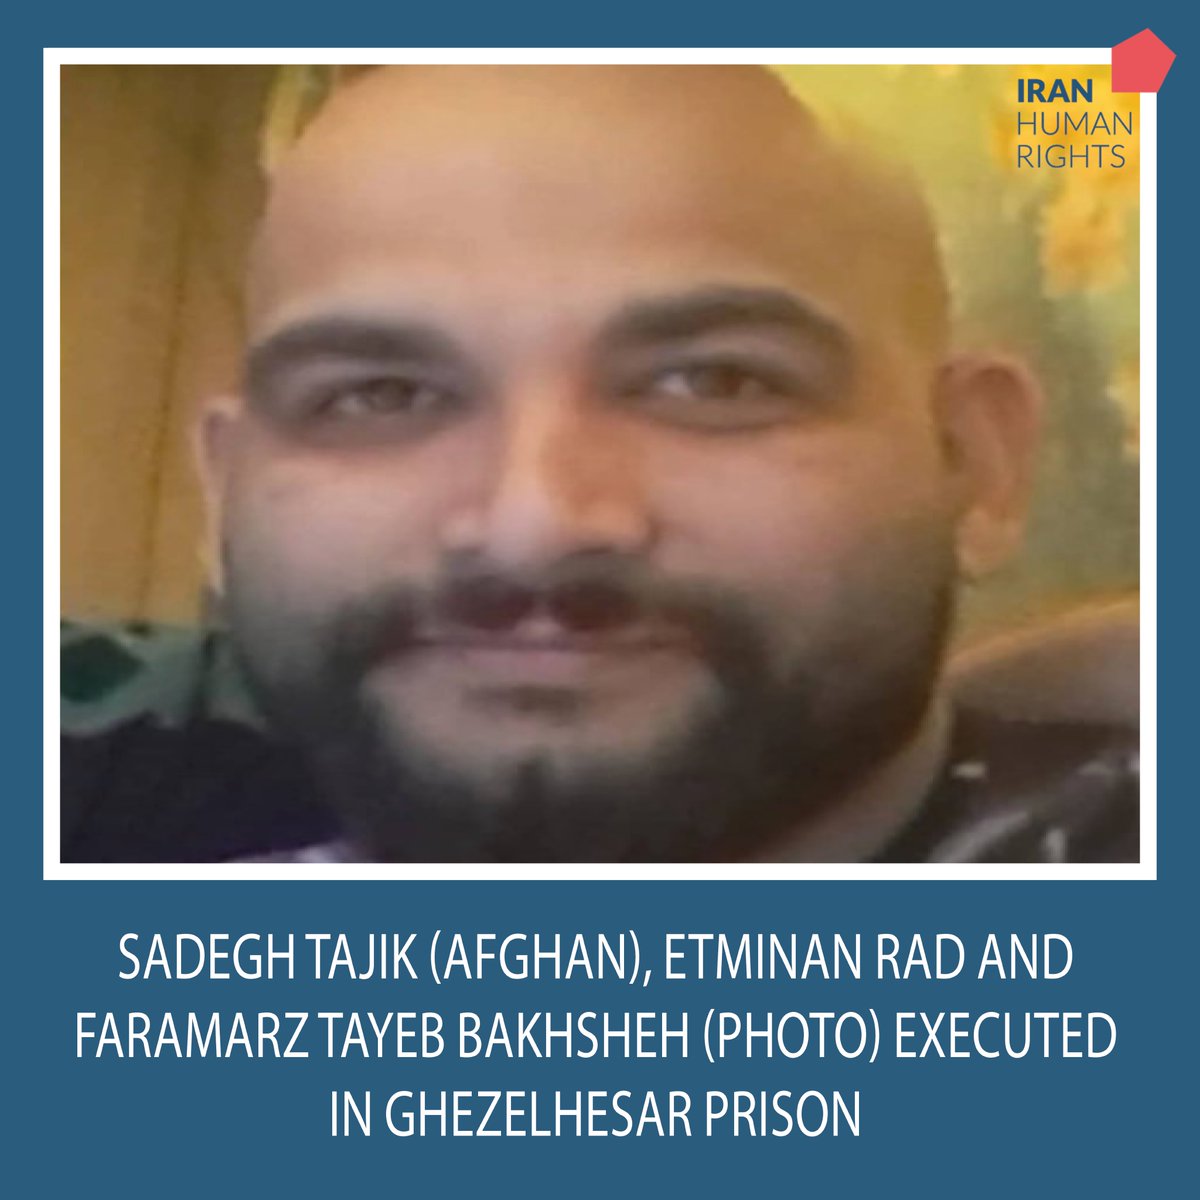 #Iran: Sadegh Tajik, an Afghan national, and Etminan Rad who were sentenced to qisas (retribution-in-kind) for murder, and Faramarz Tayeb Bakhsheh who was on death row for rape, were executed in Ghezelhesar Prison in Karaj on 17th April.

#StopExecutionsInIran
#NoDeathPenalty